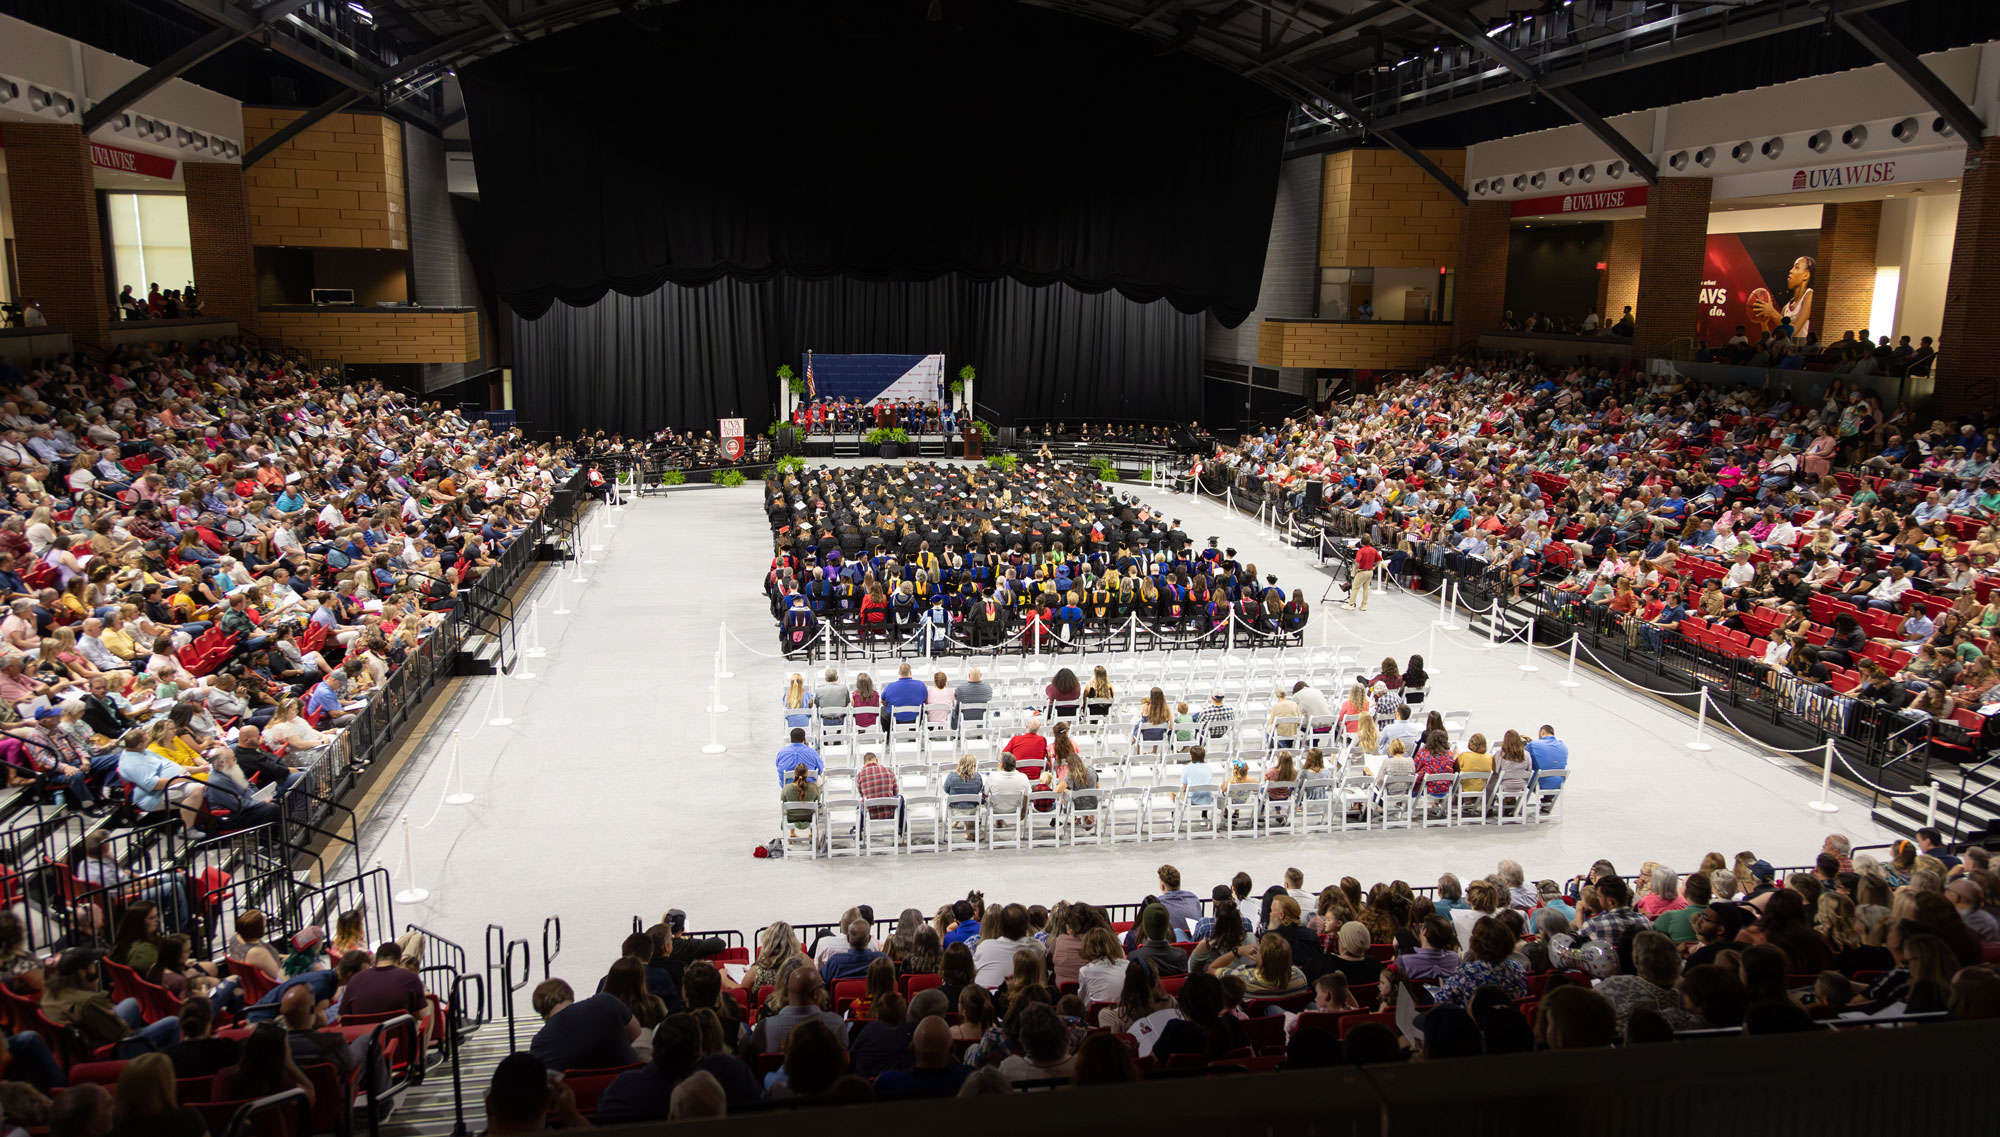 Convocation Center during Commencement